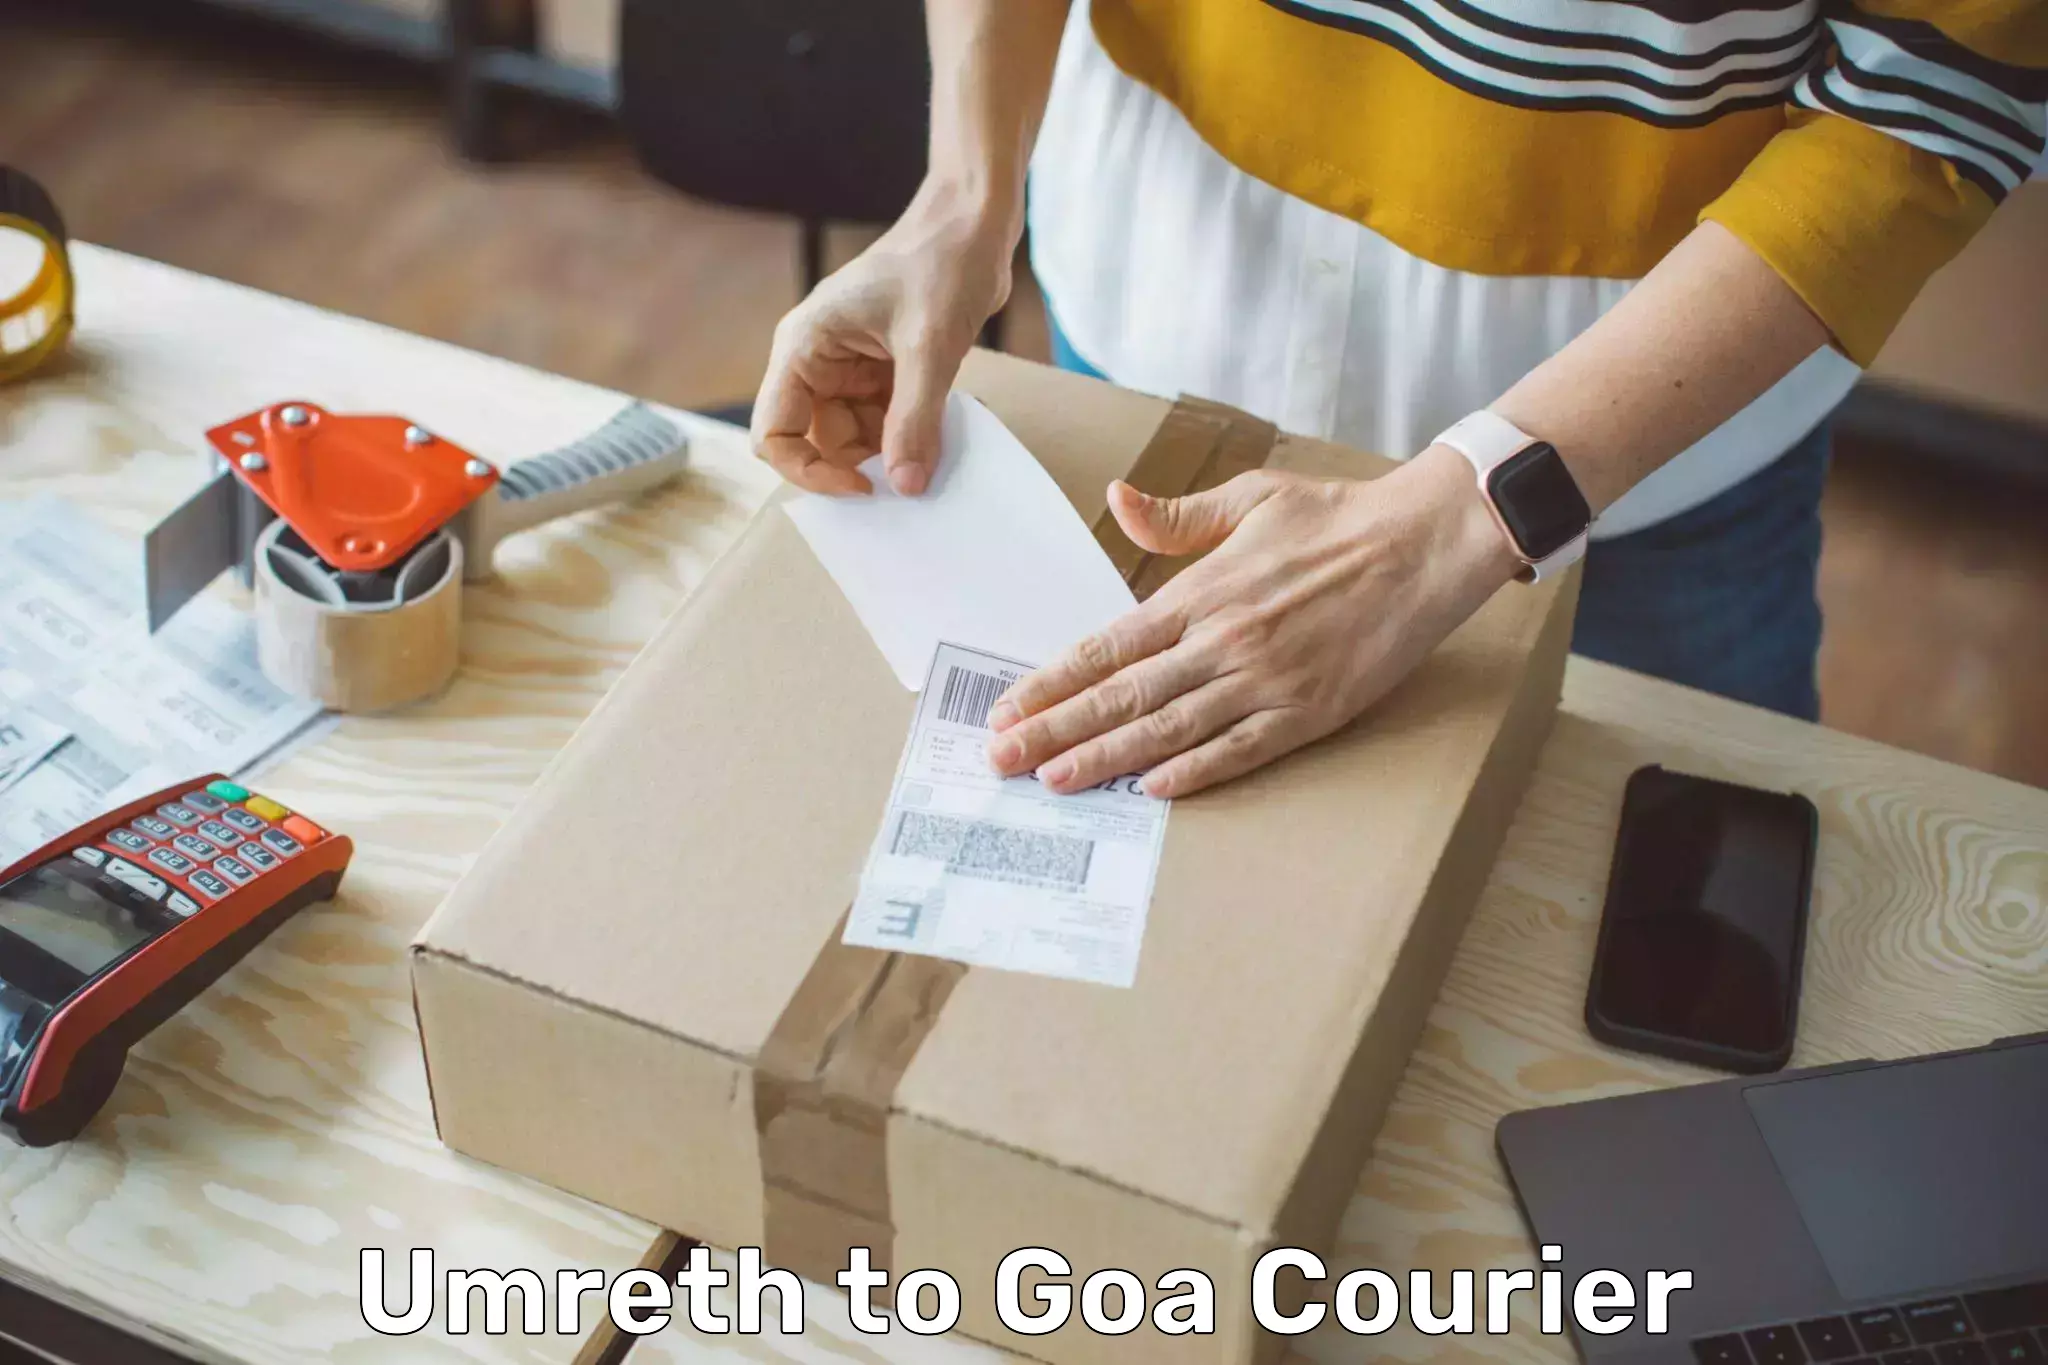 User-friendly delivery service Umreth to South Goa